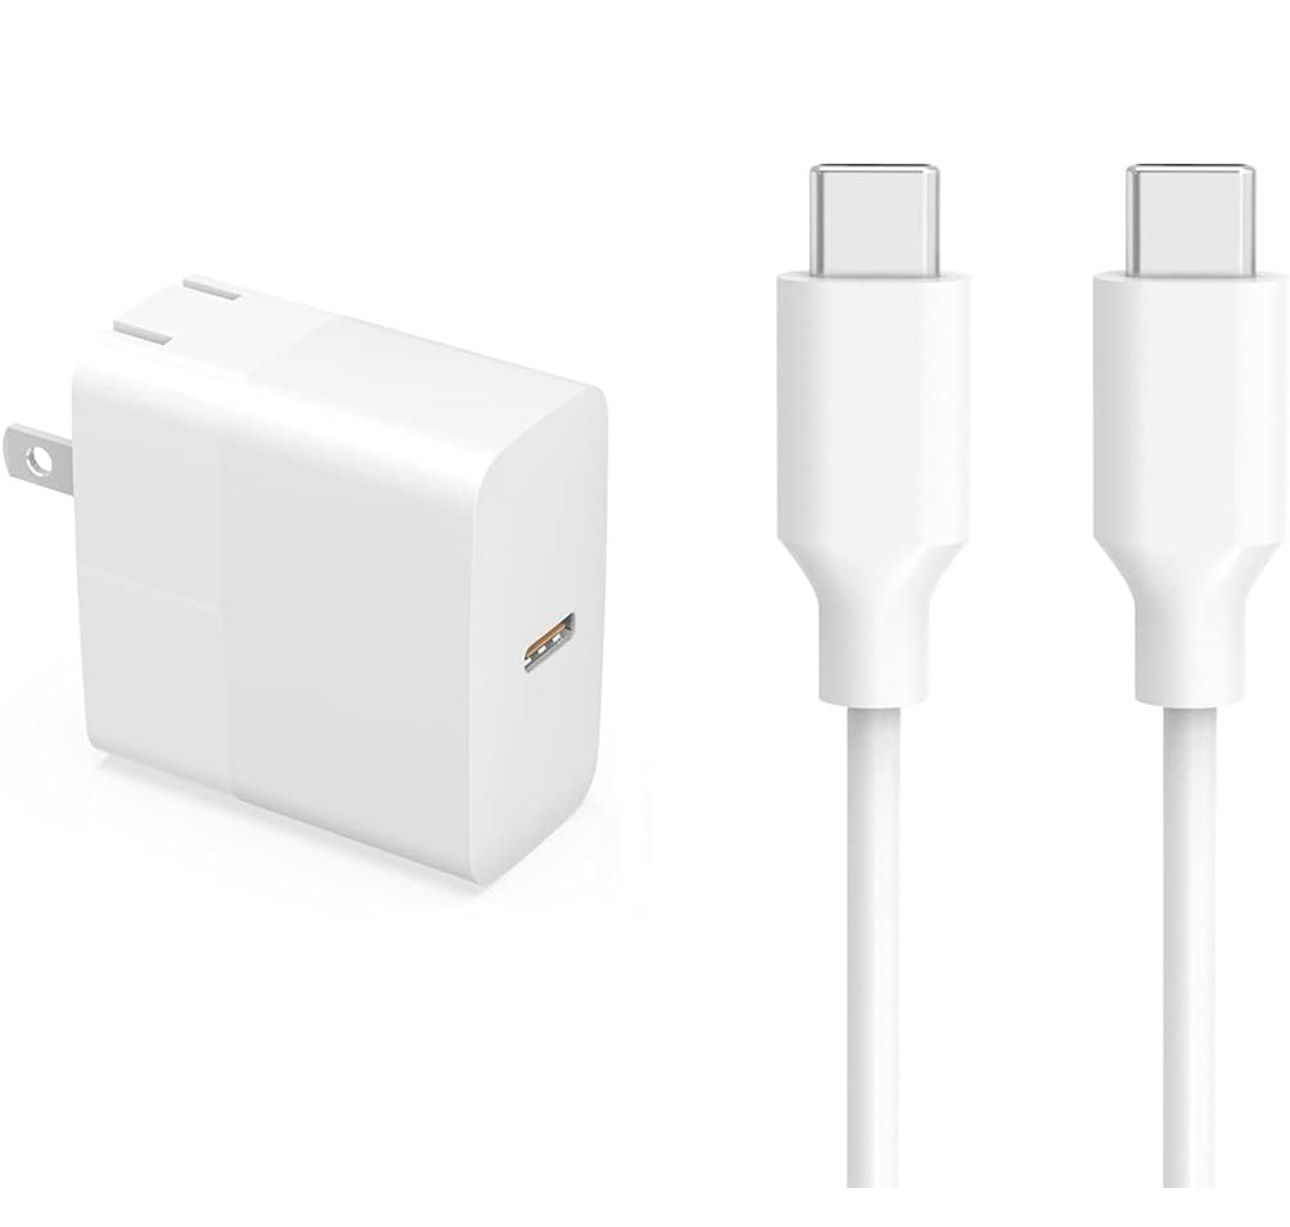 Vicgee 30W AC Charger for MacBook Air Laptop, iPad Air 4th Generation Tablet with USB-C to C Charging Cable